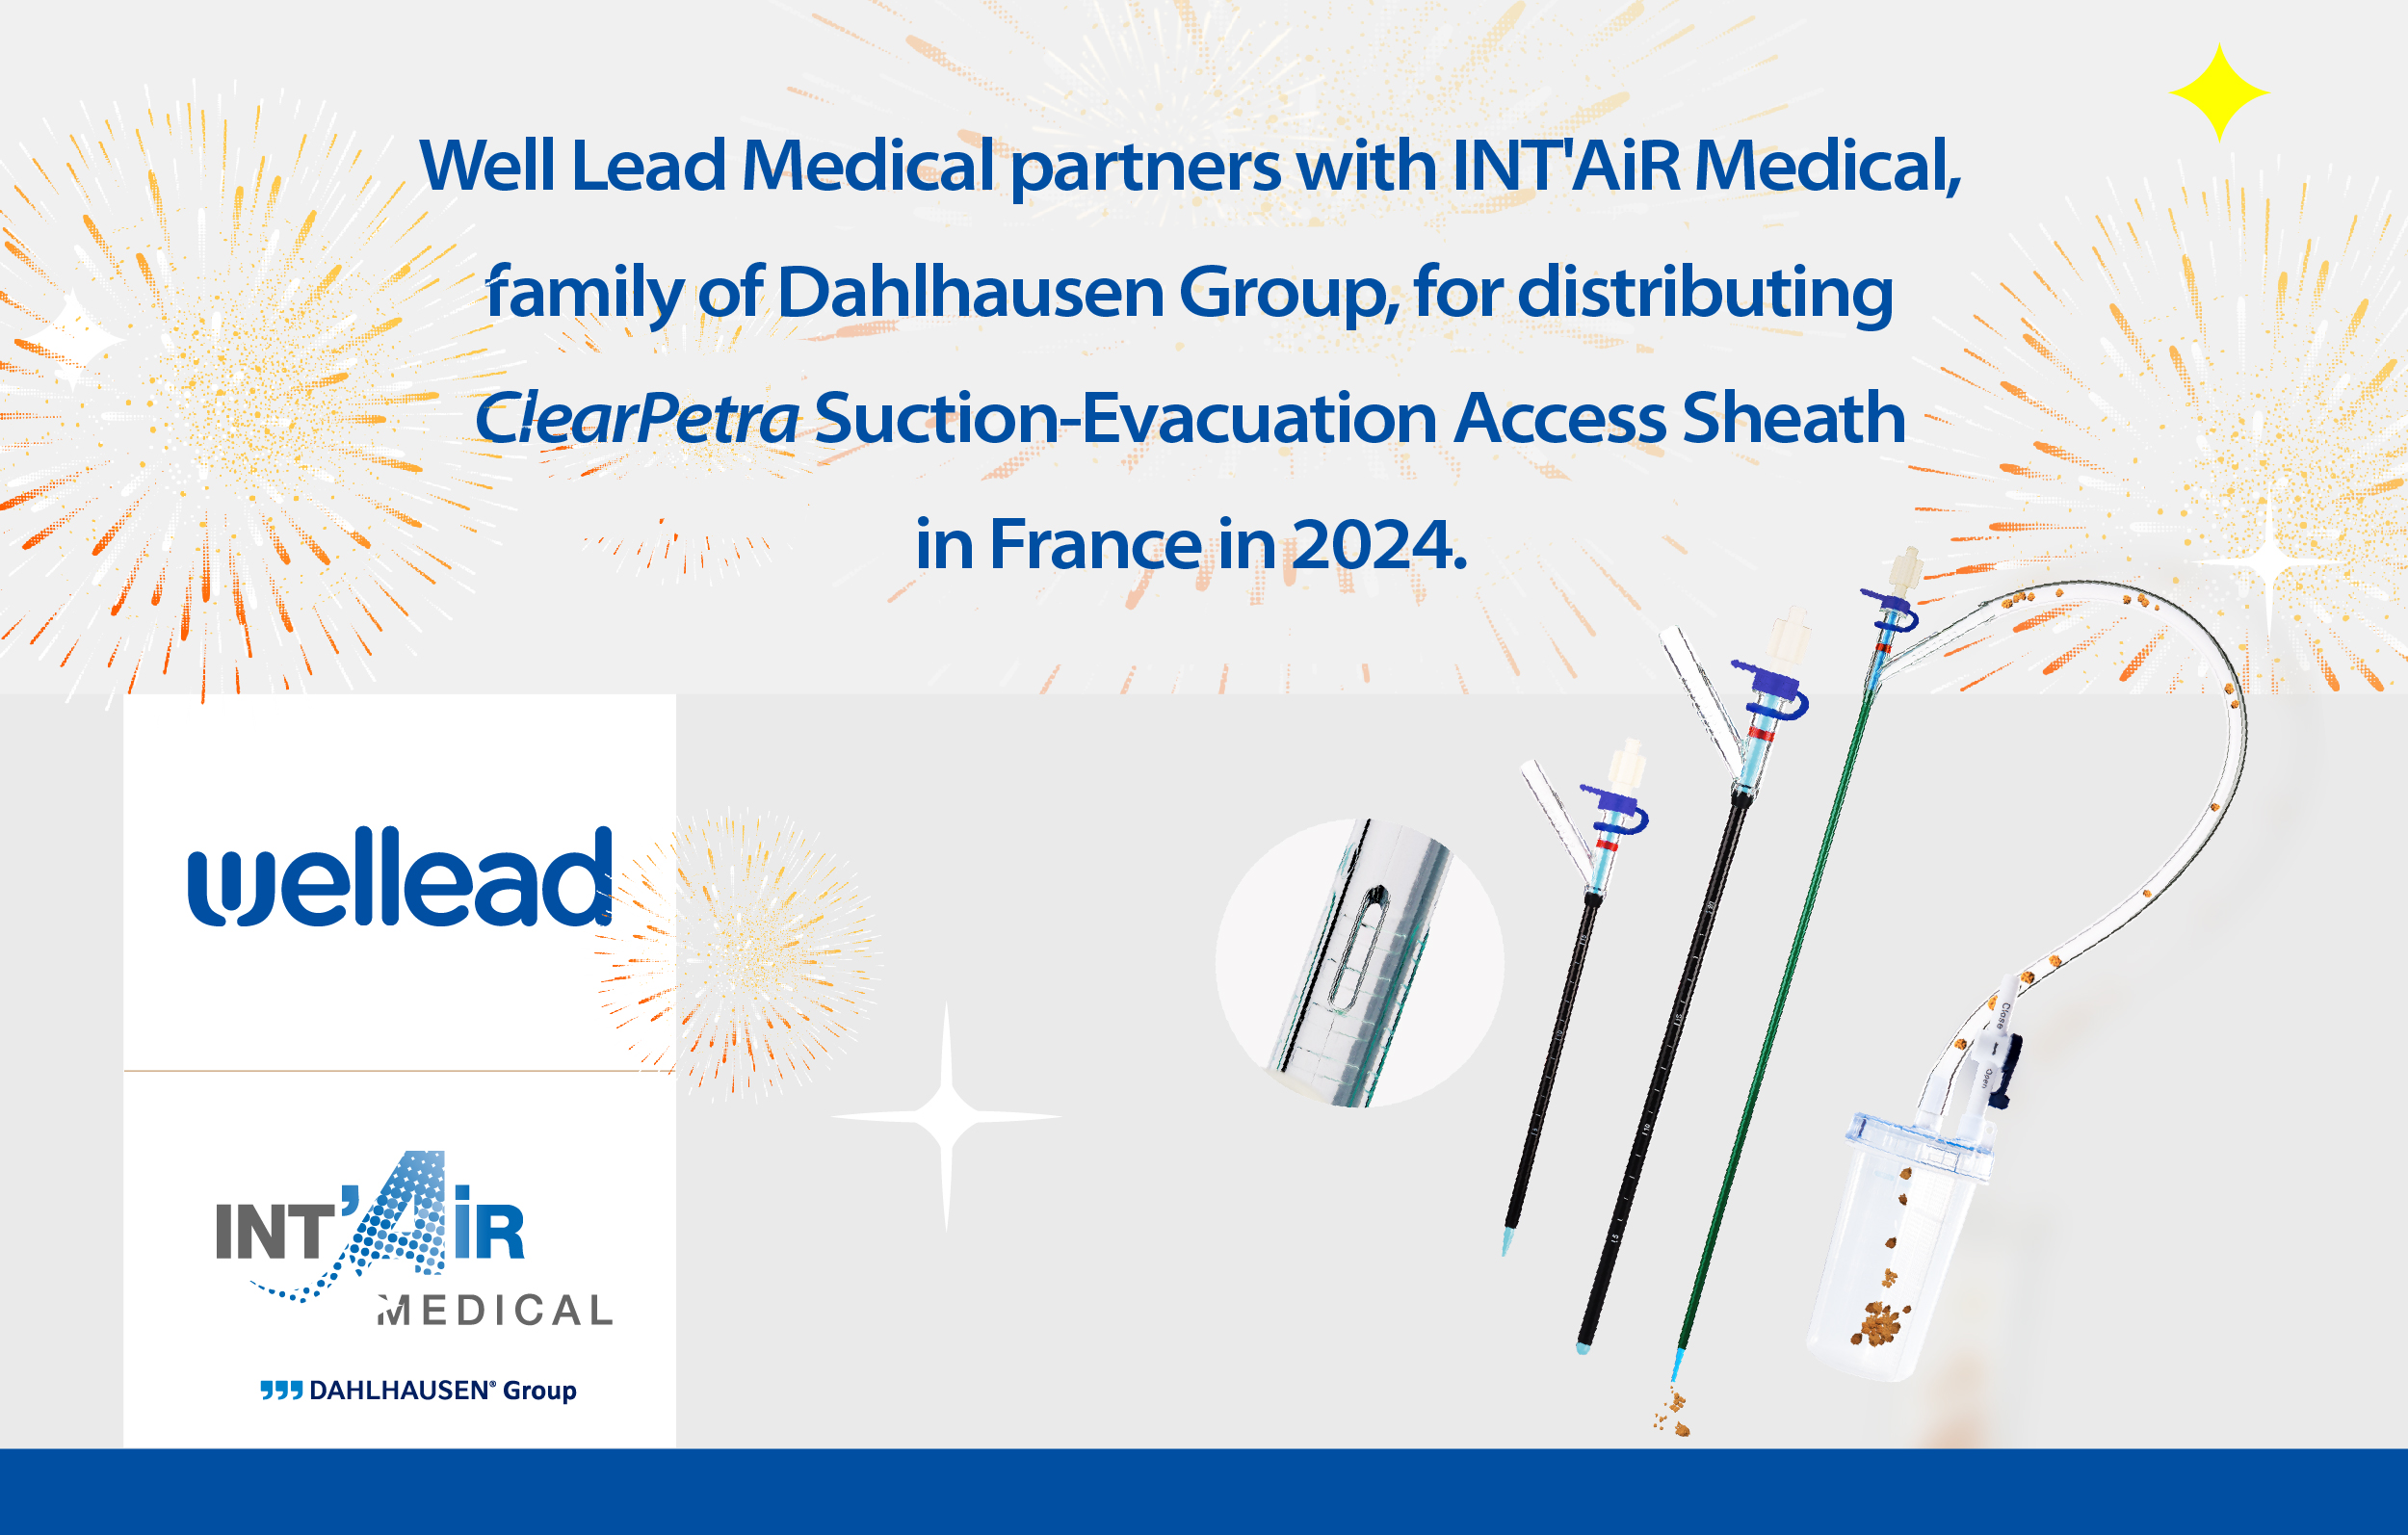 Well Lead Partners with INT'AiR Medical to Distribute ClearPetra Suction-Evacuation Access Sheath in France in 2024